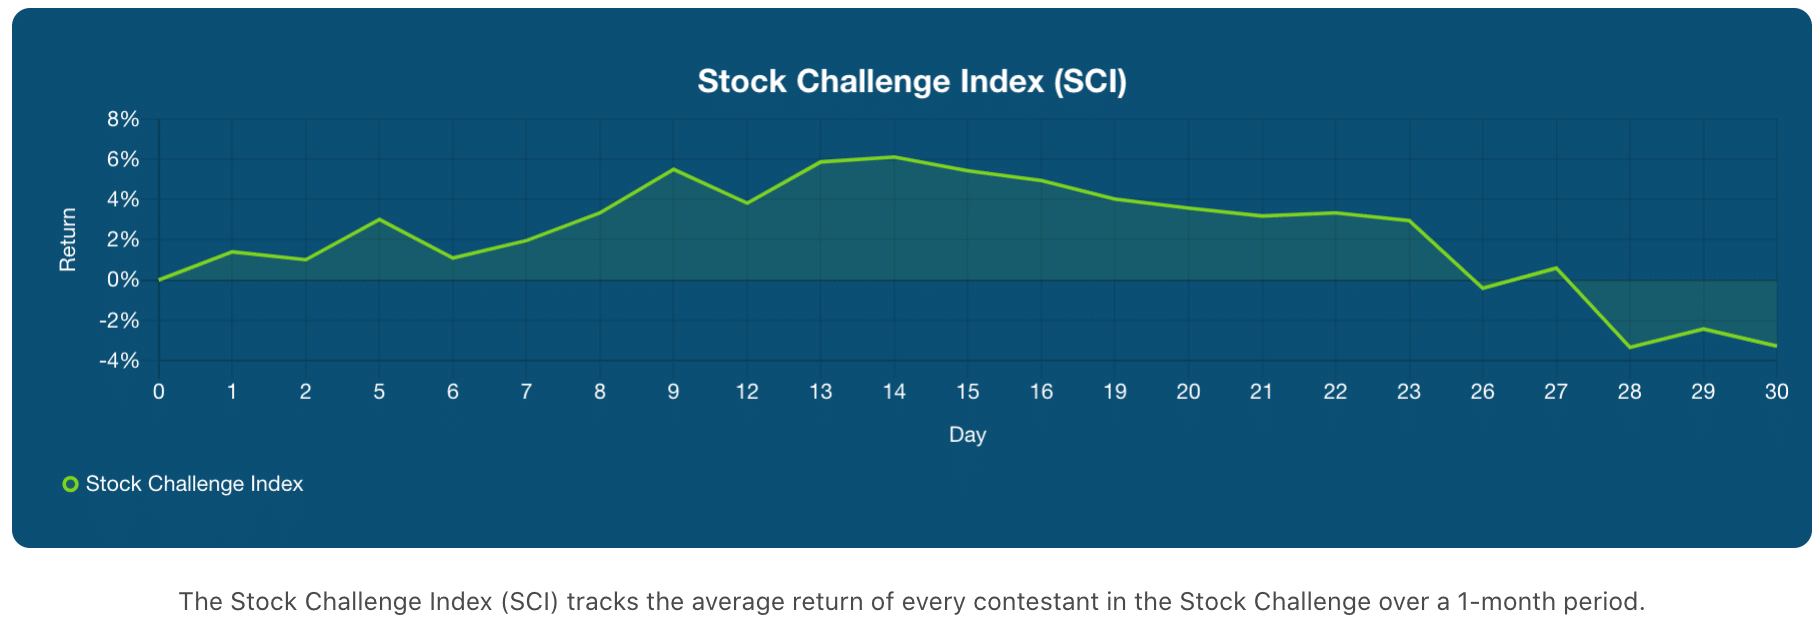 Stock Challenge Index for October 2020